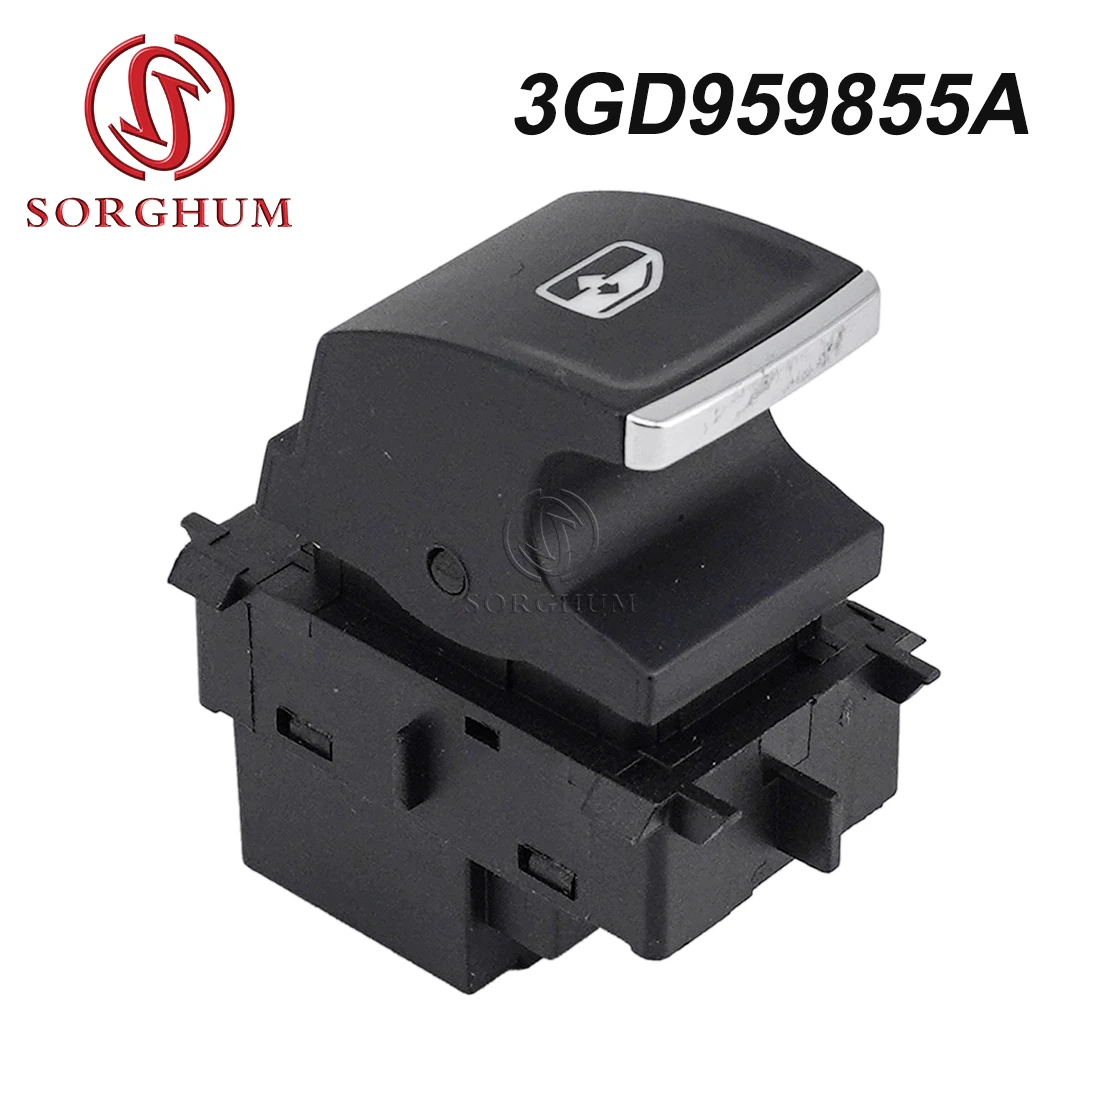 

Sorghum Car Power Window Switch Glass Lifter Control Regulator Auto Parts OEM 3GD959855A for VW Magotan Car Accessories